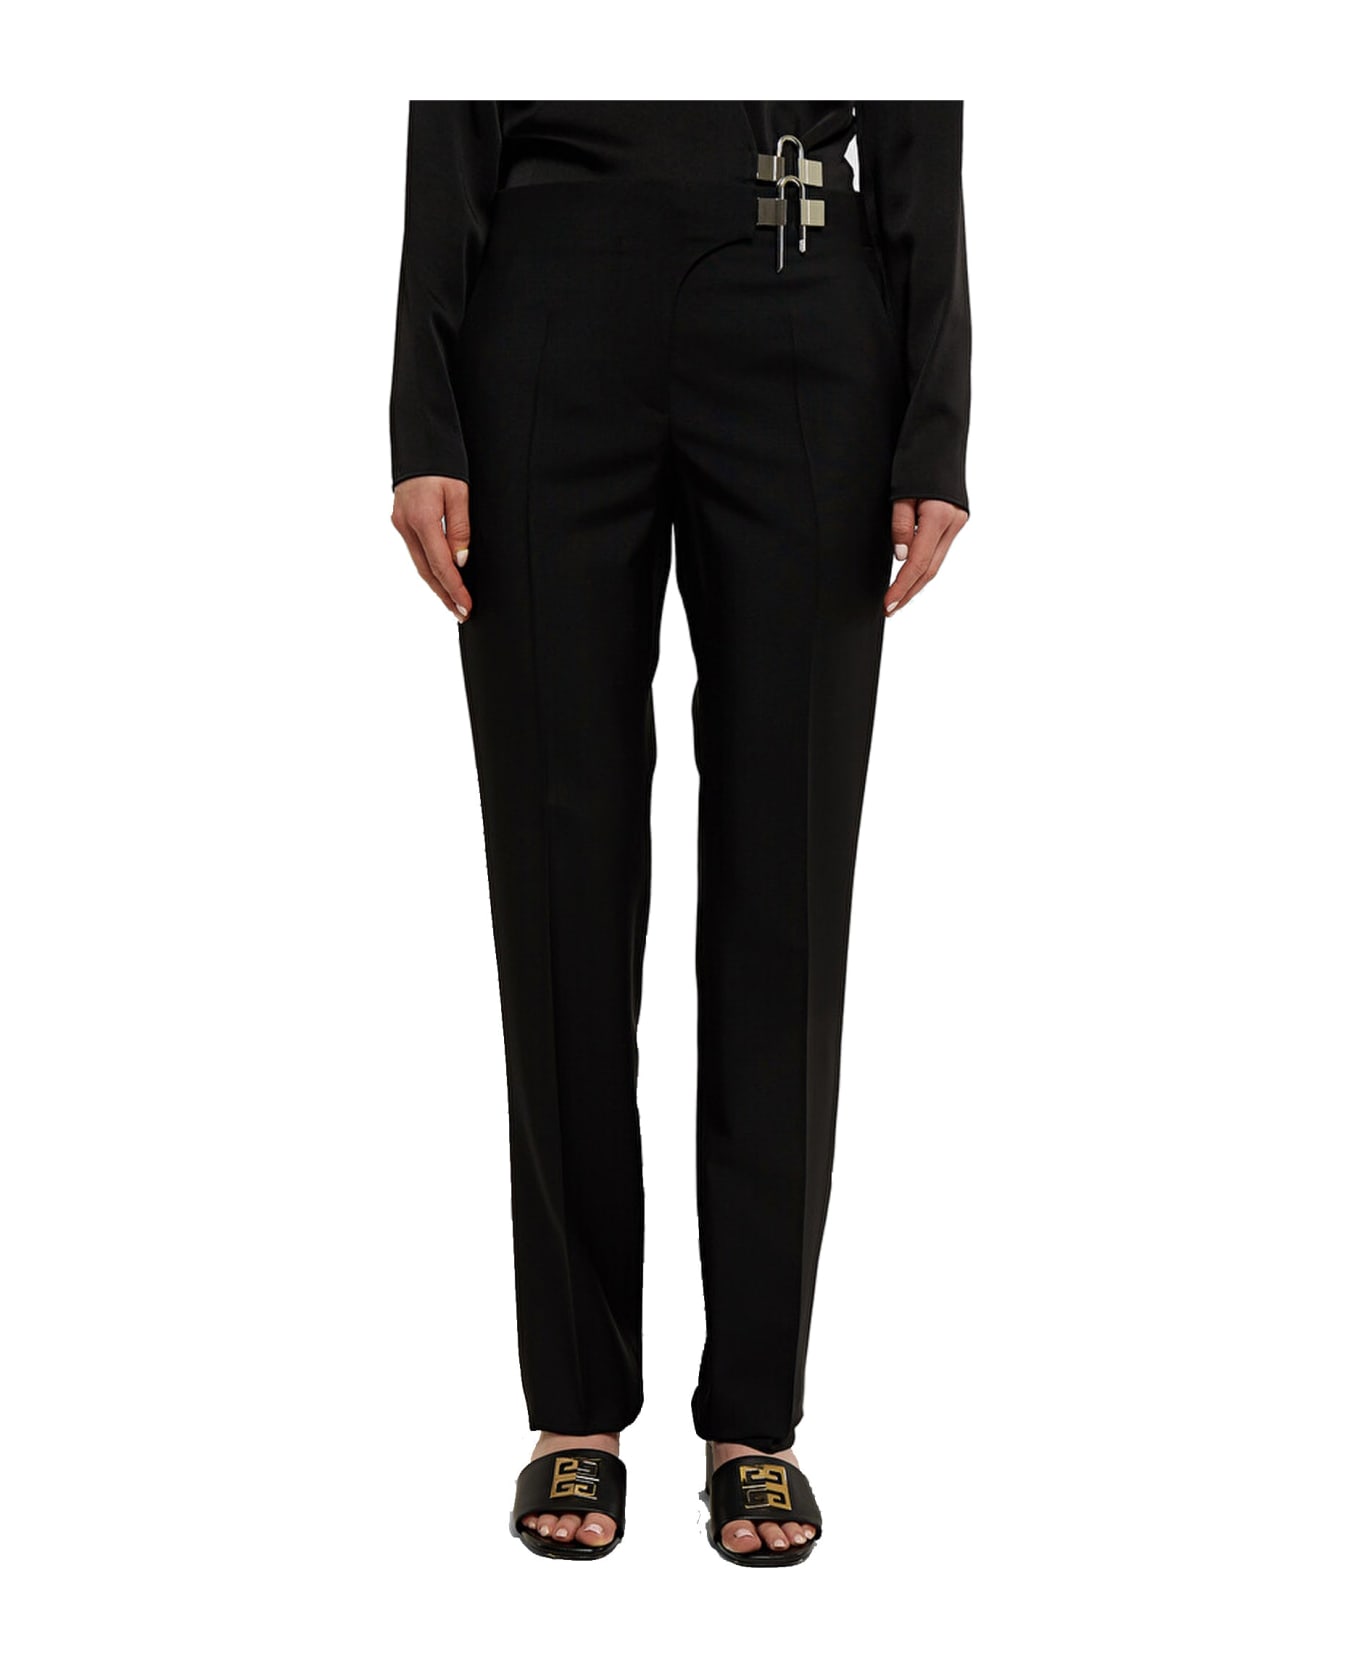 Givenchy Cady Trousers - Black ボトムス